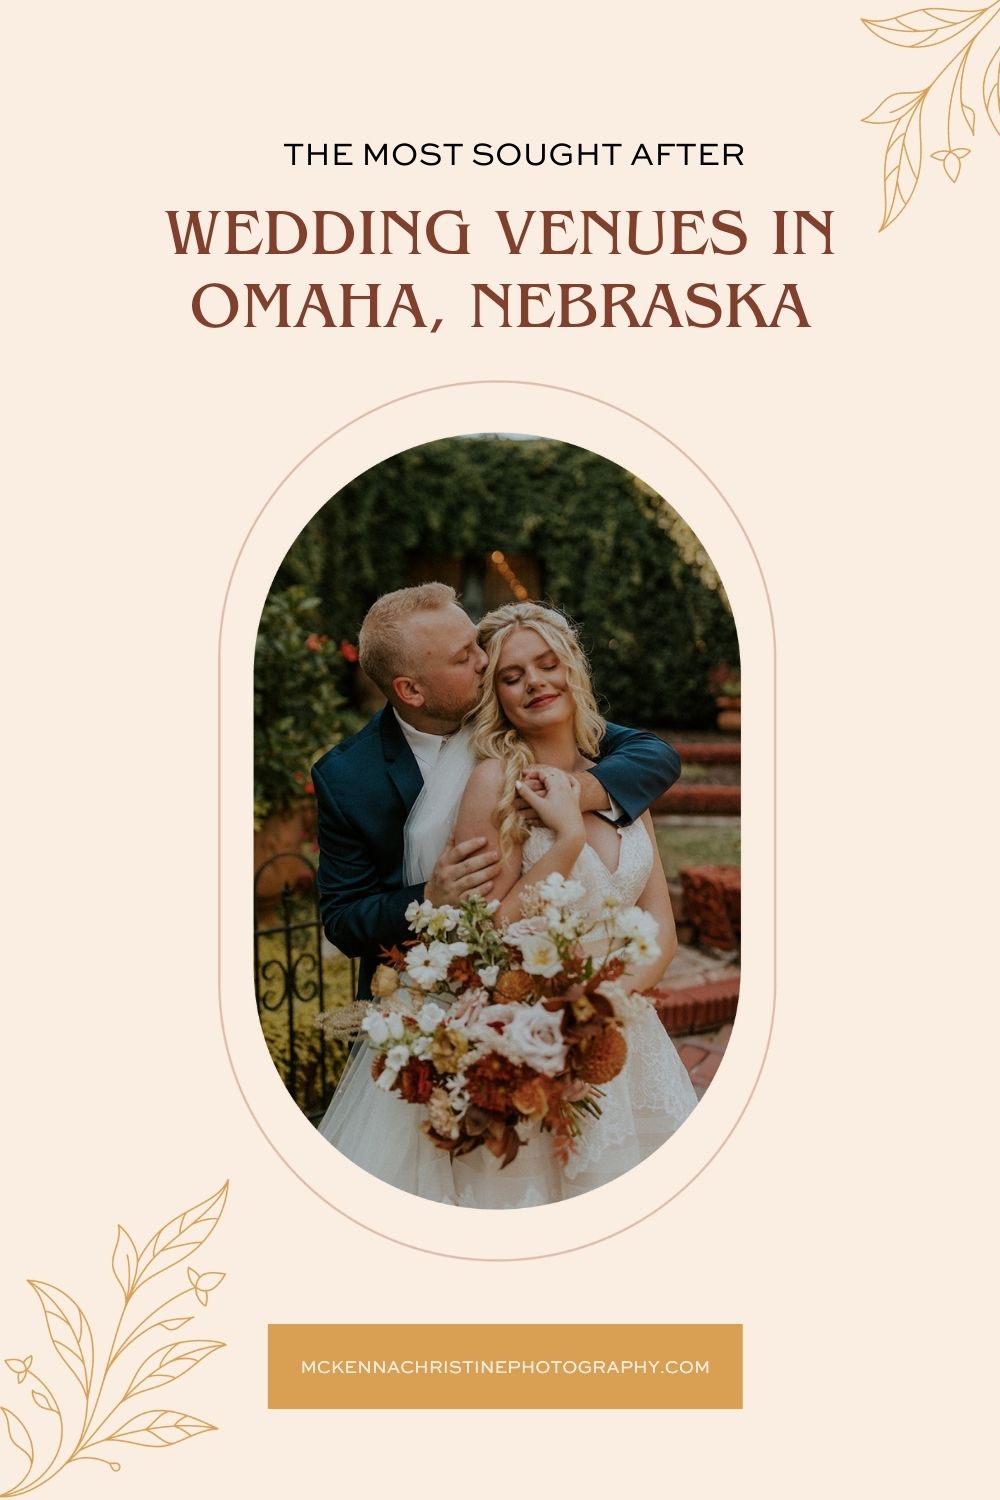 Groom hugging the bride from behind as he plants a kiss on her cheek; image overlaid with text that reads The Most Sought After Wedding Venues in Omaha, Nebraska